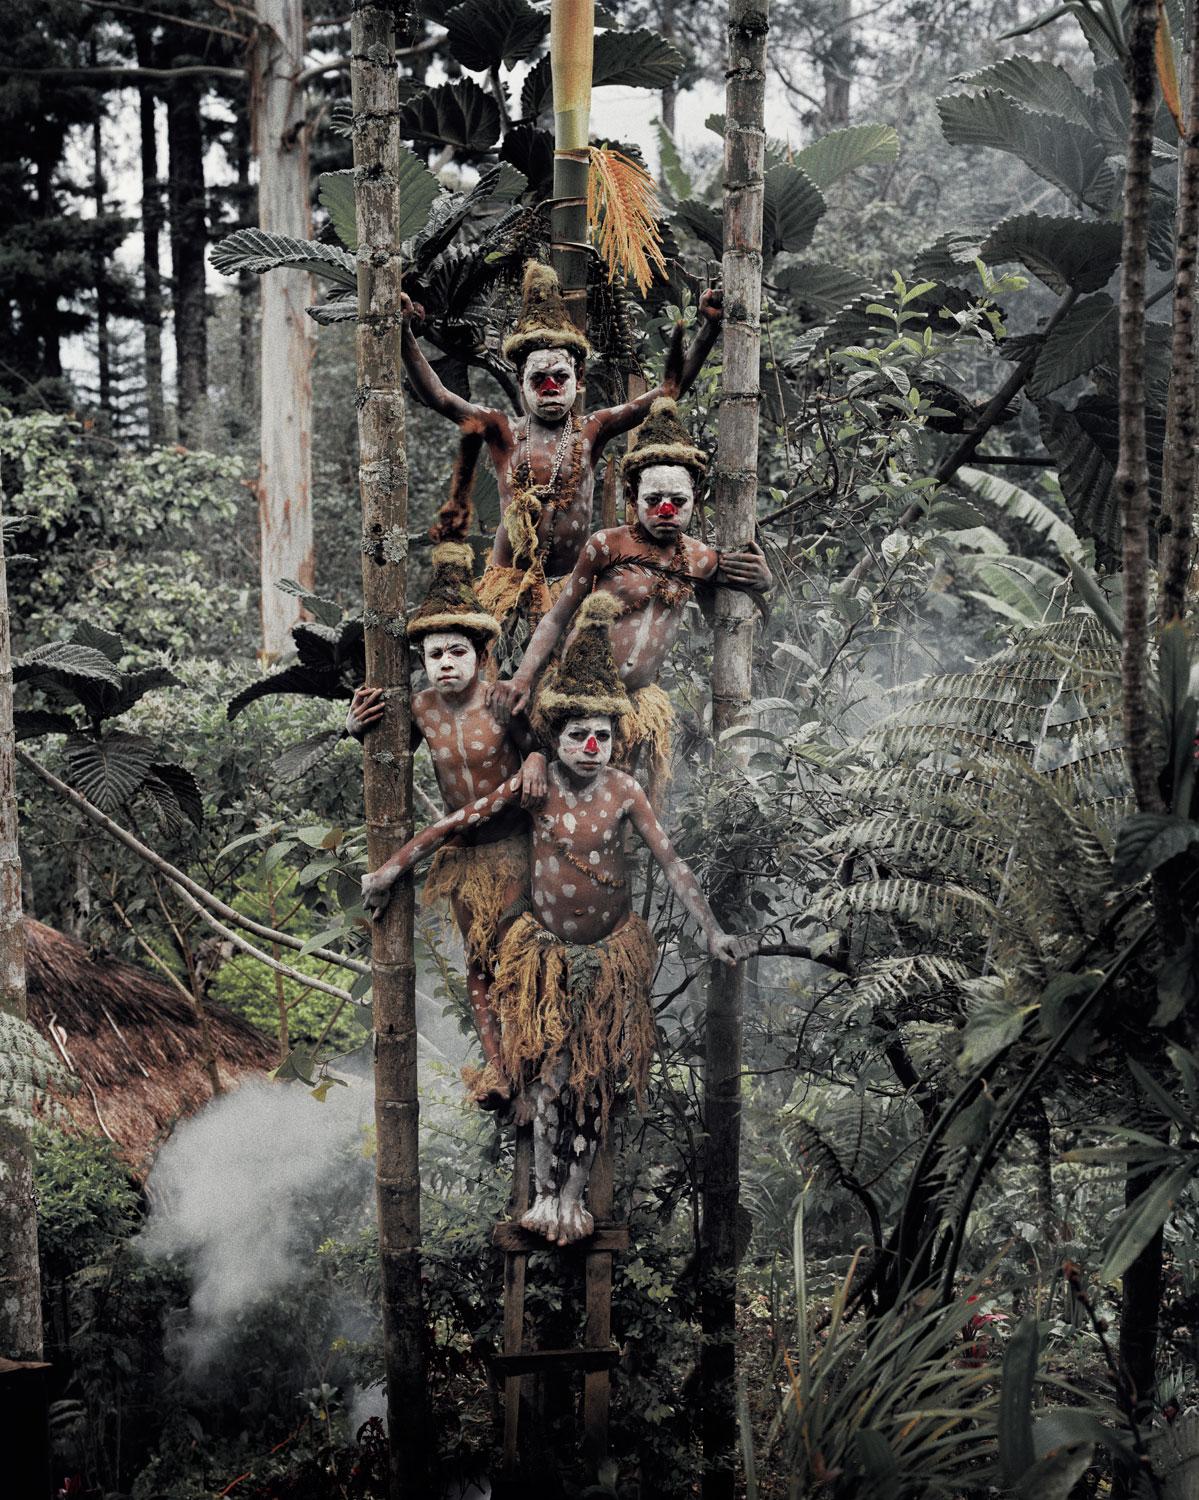 "XV 61 - Gogine Boys - Goroka, Eastern Highland - Papua New Guinea, 2010

Papua is where we started our two-month trip in Oceania. As a region it’s a lot easier to travel through than New Guinea, because it’s part of Indonesia and therefore a lot